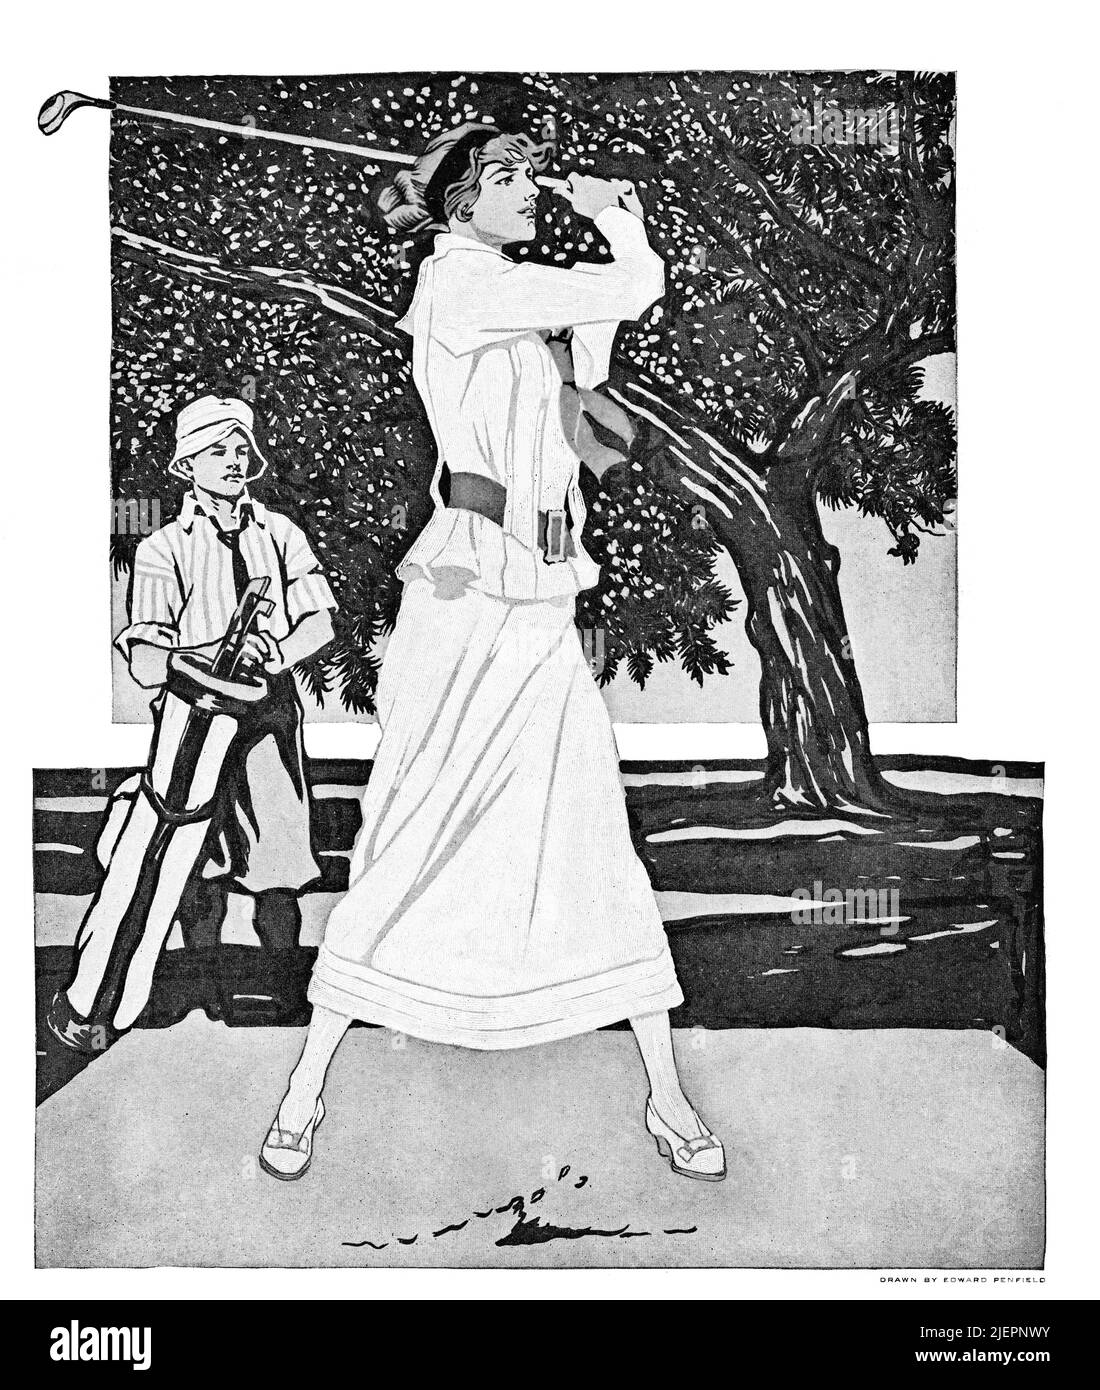 An early 20th century illustration by Edward Penfield (1866-1925) on the cover of Collier's, an American general interest magazine featuring a lady golfer and watching caddie. Stock Photo